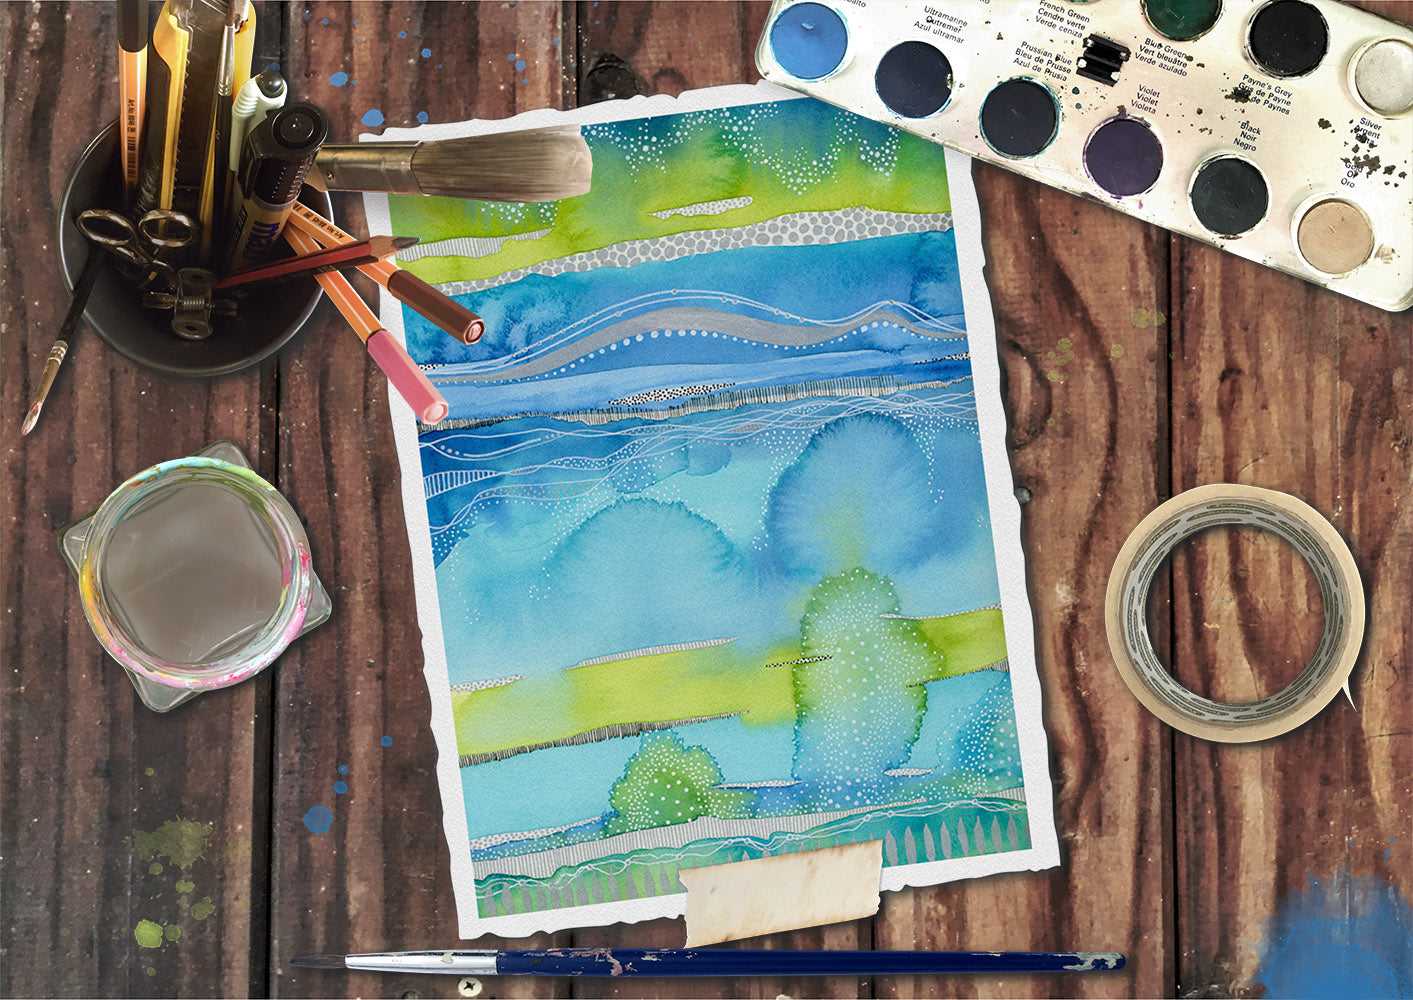 this is an image of a painting by joanne grant art.  This painting is blue and teal and lime green.  It is an abstract landscape painted with watercolor paints.  The painting is laying on a brown desk with art supplies surrounding it.  The art supplies are masking tape, which is to the right, a jar of water to the left of the painting, a paint brush below the painting, a can of pencils, pens, extra paint brushes and scissors and to the top left is a watercolor pan with paints in it.